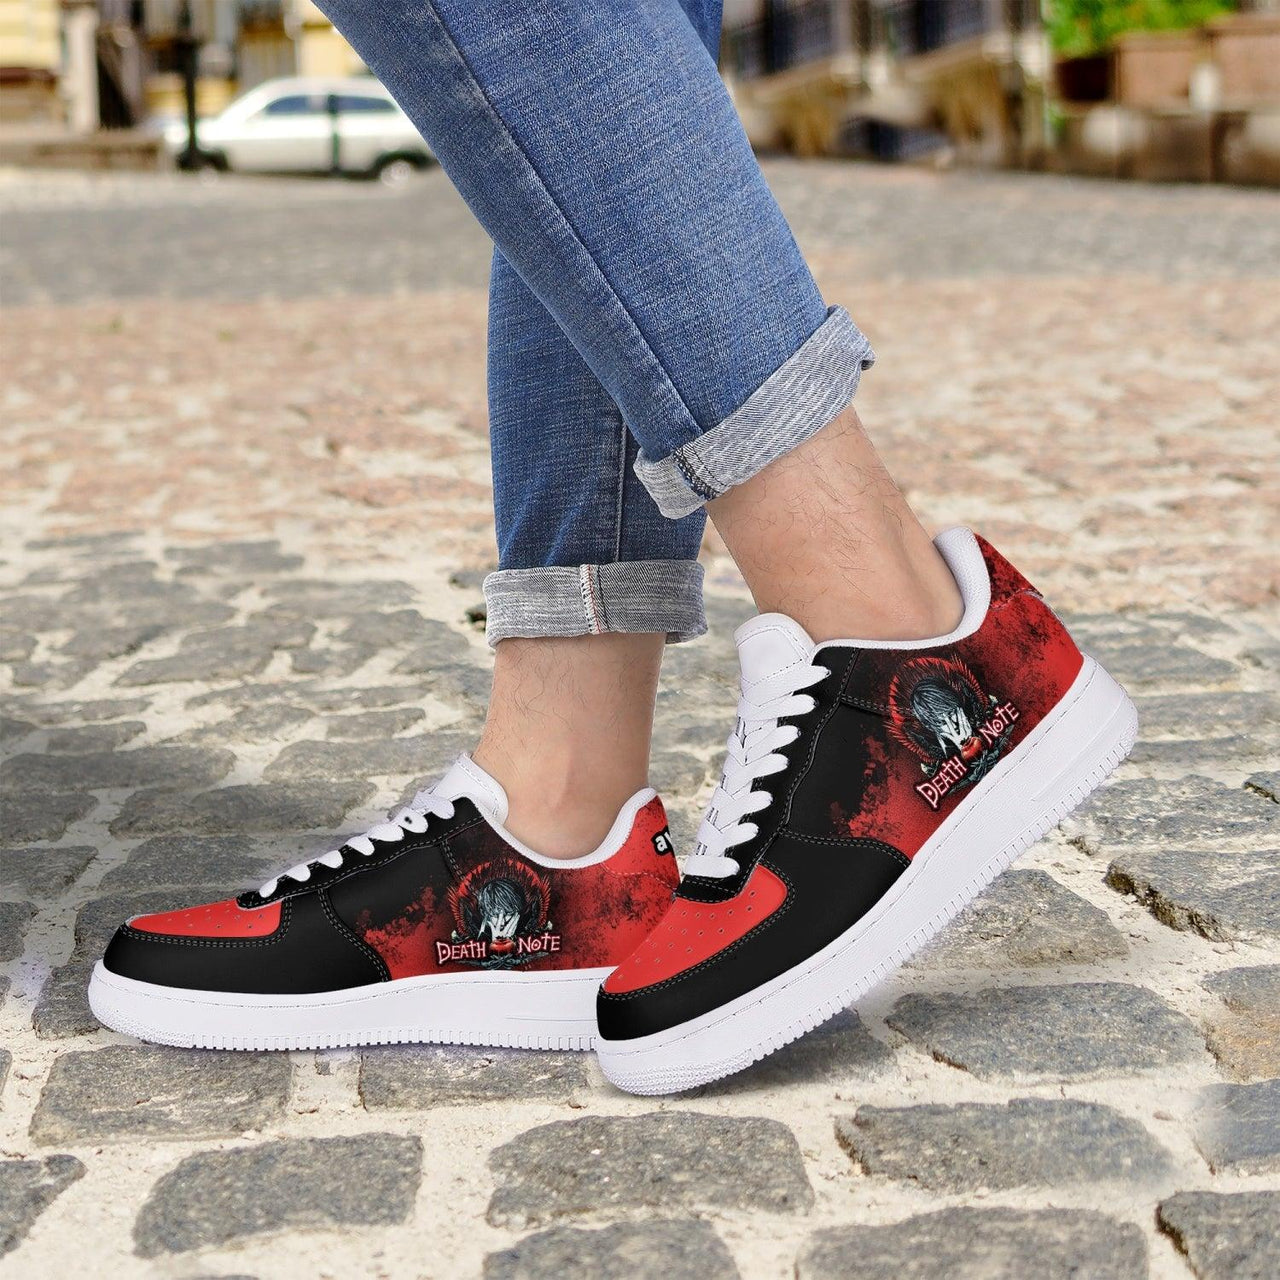 Death Note Red Black AF1 Anime Shoes _ Death Note _ Ayuko